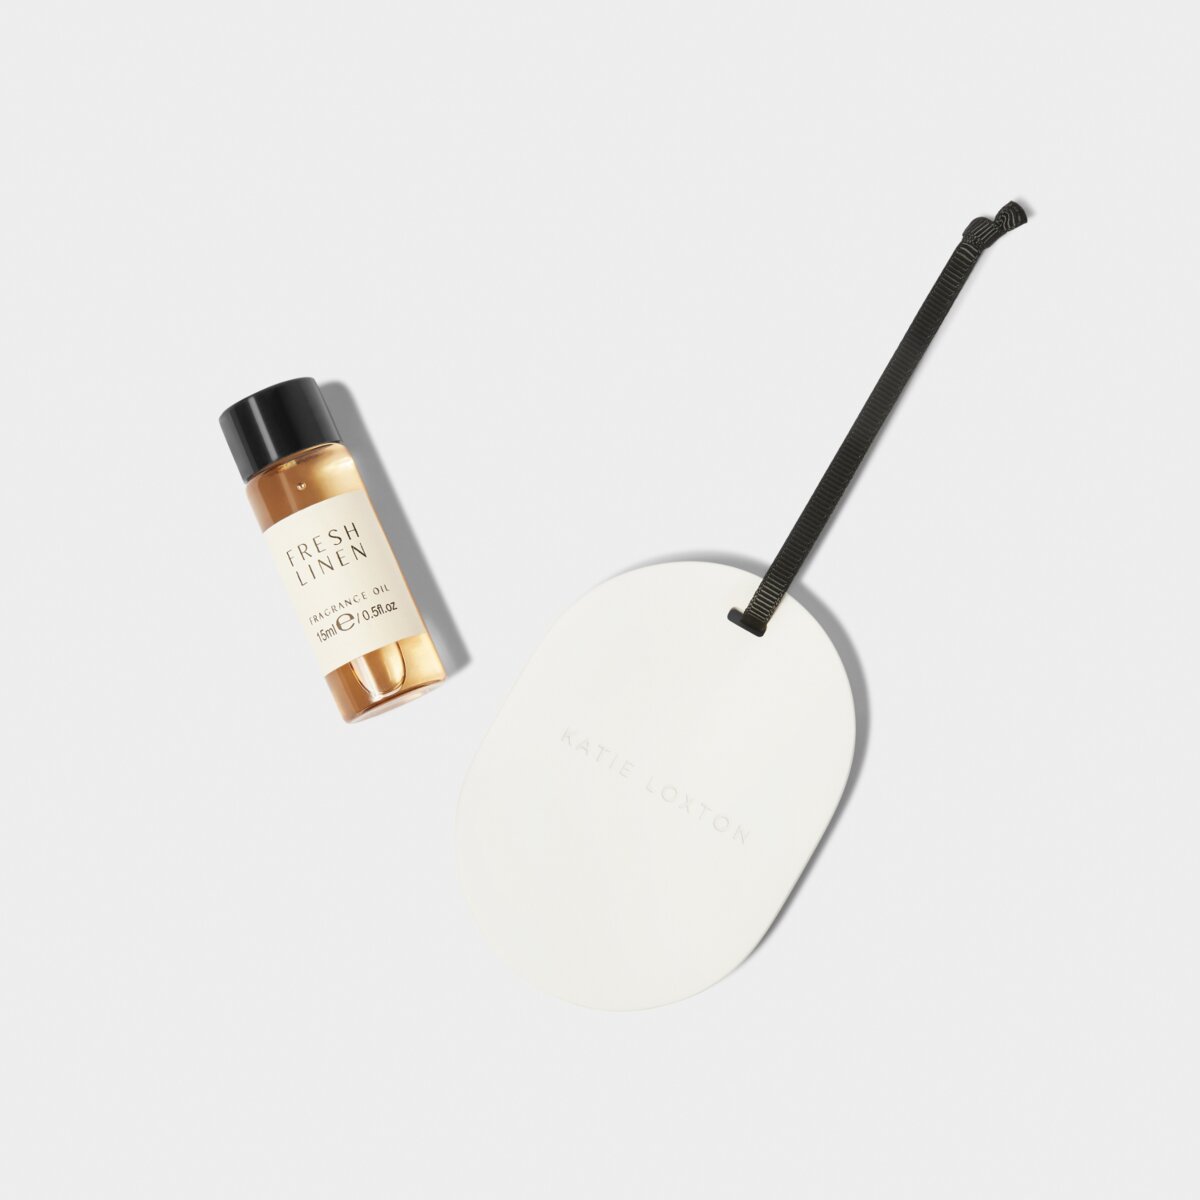 white cermaic diffuser lying next to fresh linen scented diffuser oil